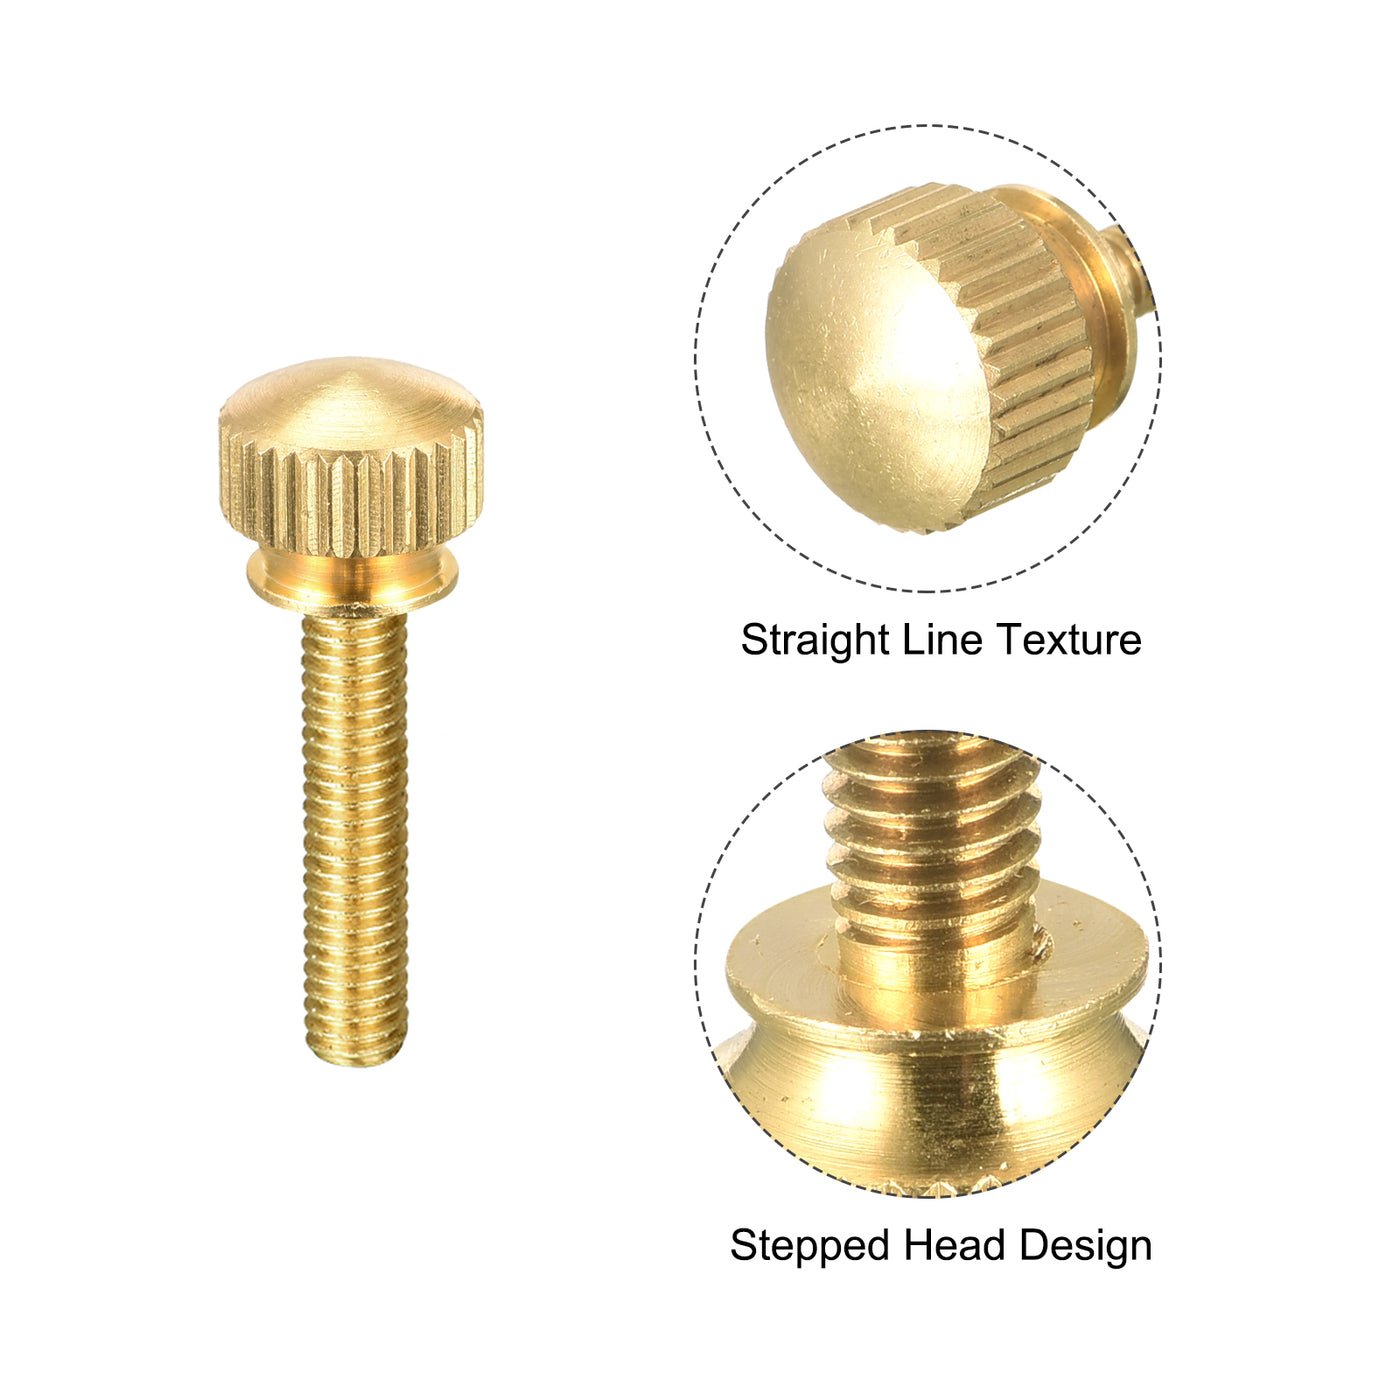 uxcell Uxcell 5Pcs Knurled Thumb Screws, M4x20mm Brass Shoulder Bolts Stepped Grip Knobs Fasteners for PC, Electronic, Mechanical